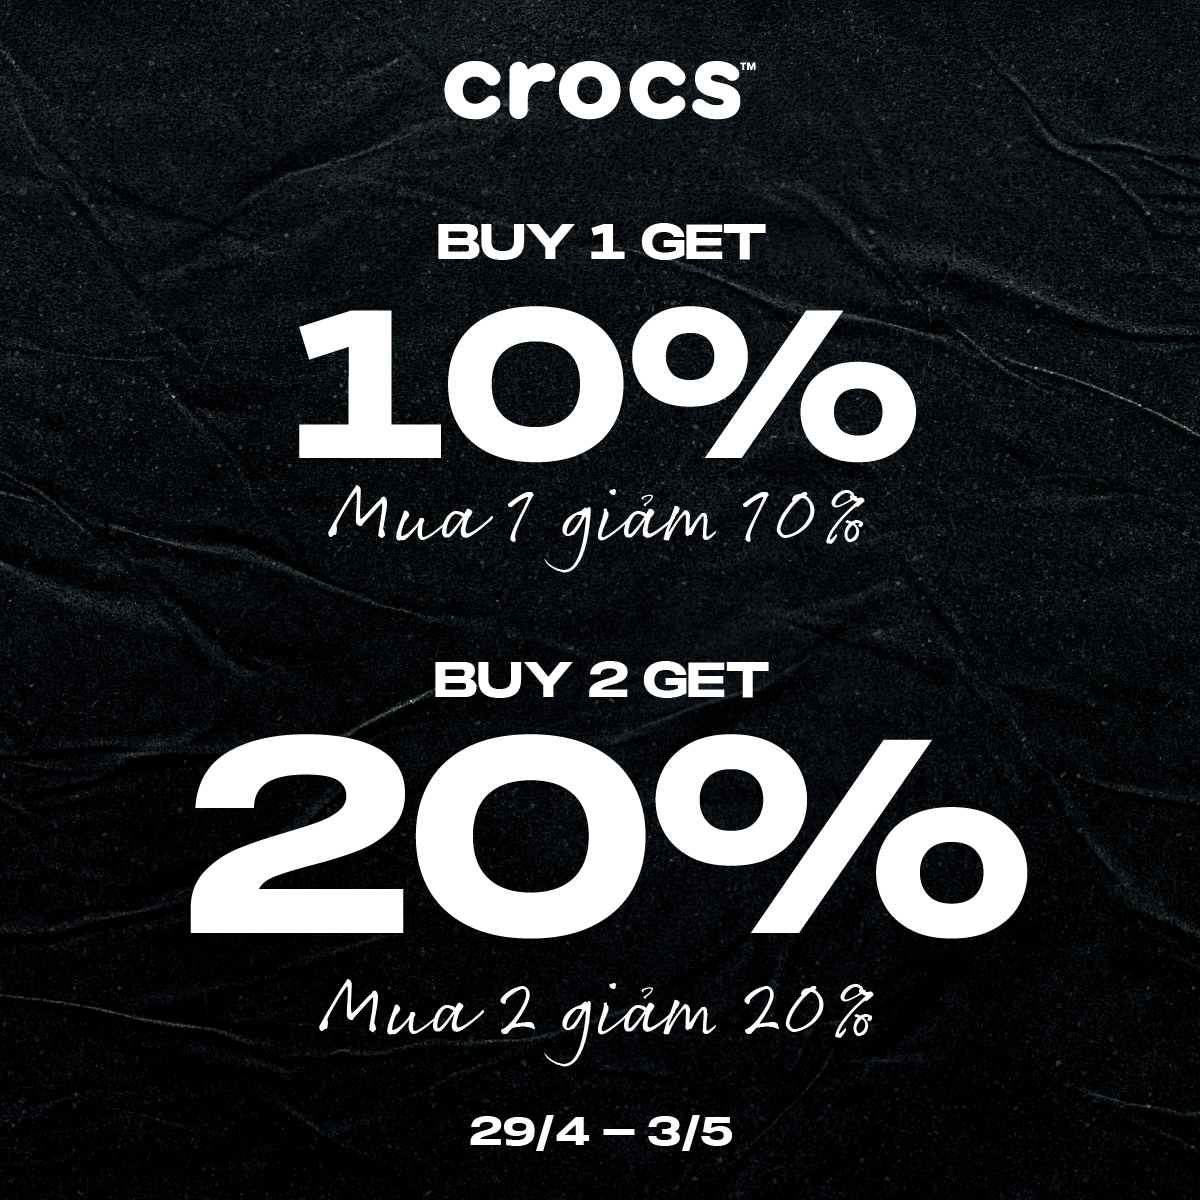 Celebrate the big holidays 30/4 & 1/5 with Crocs